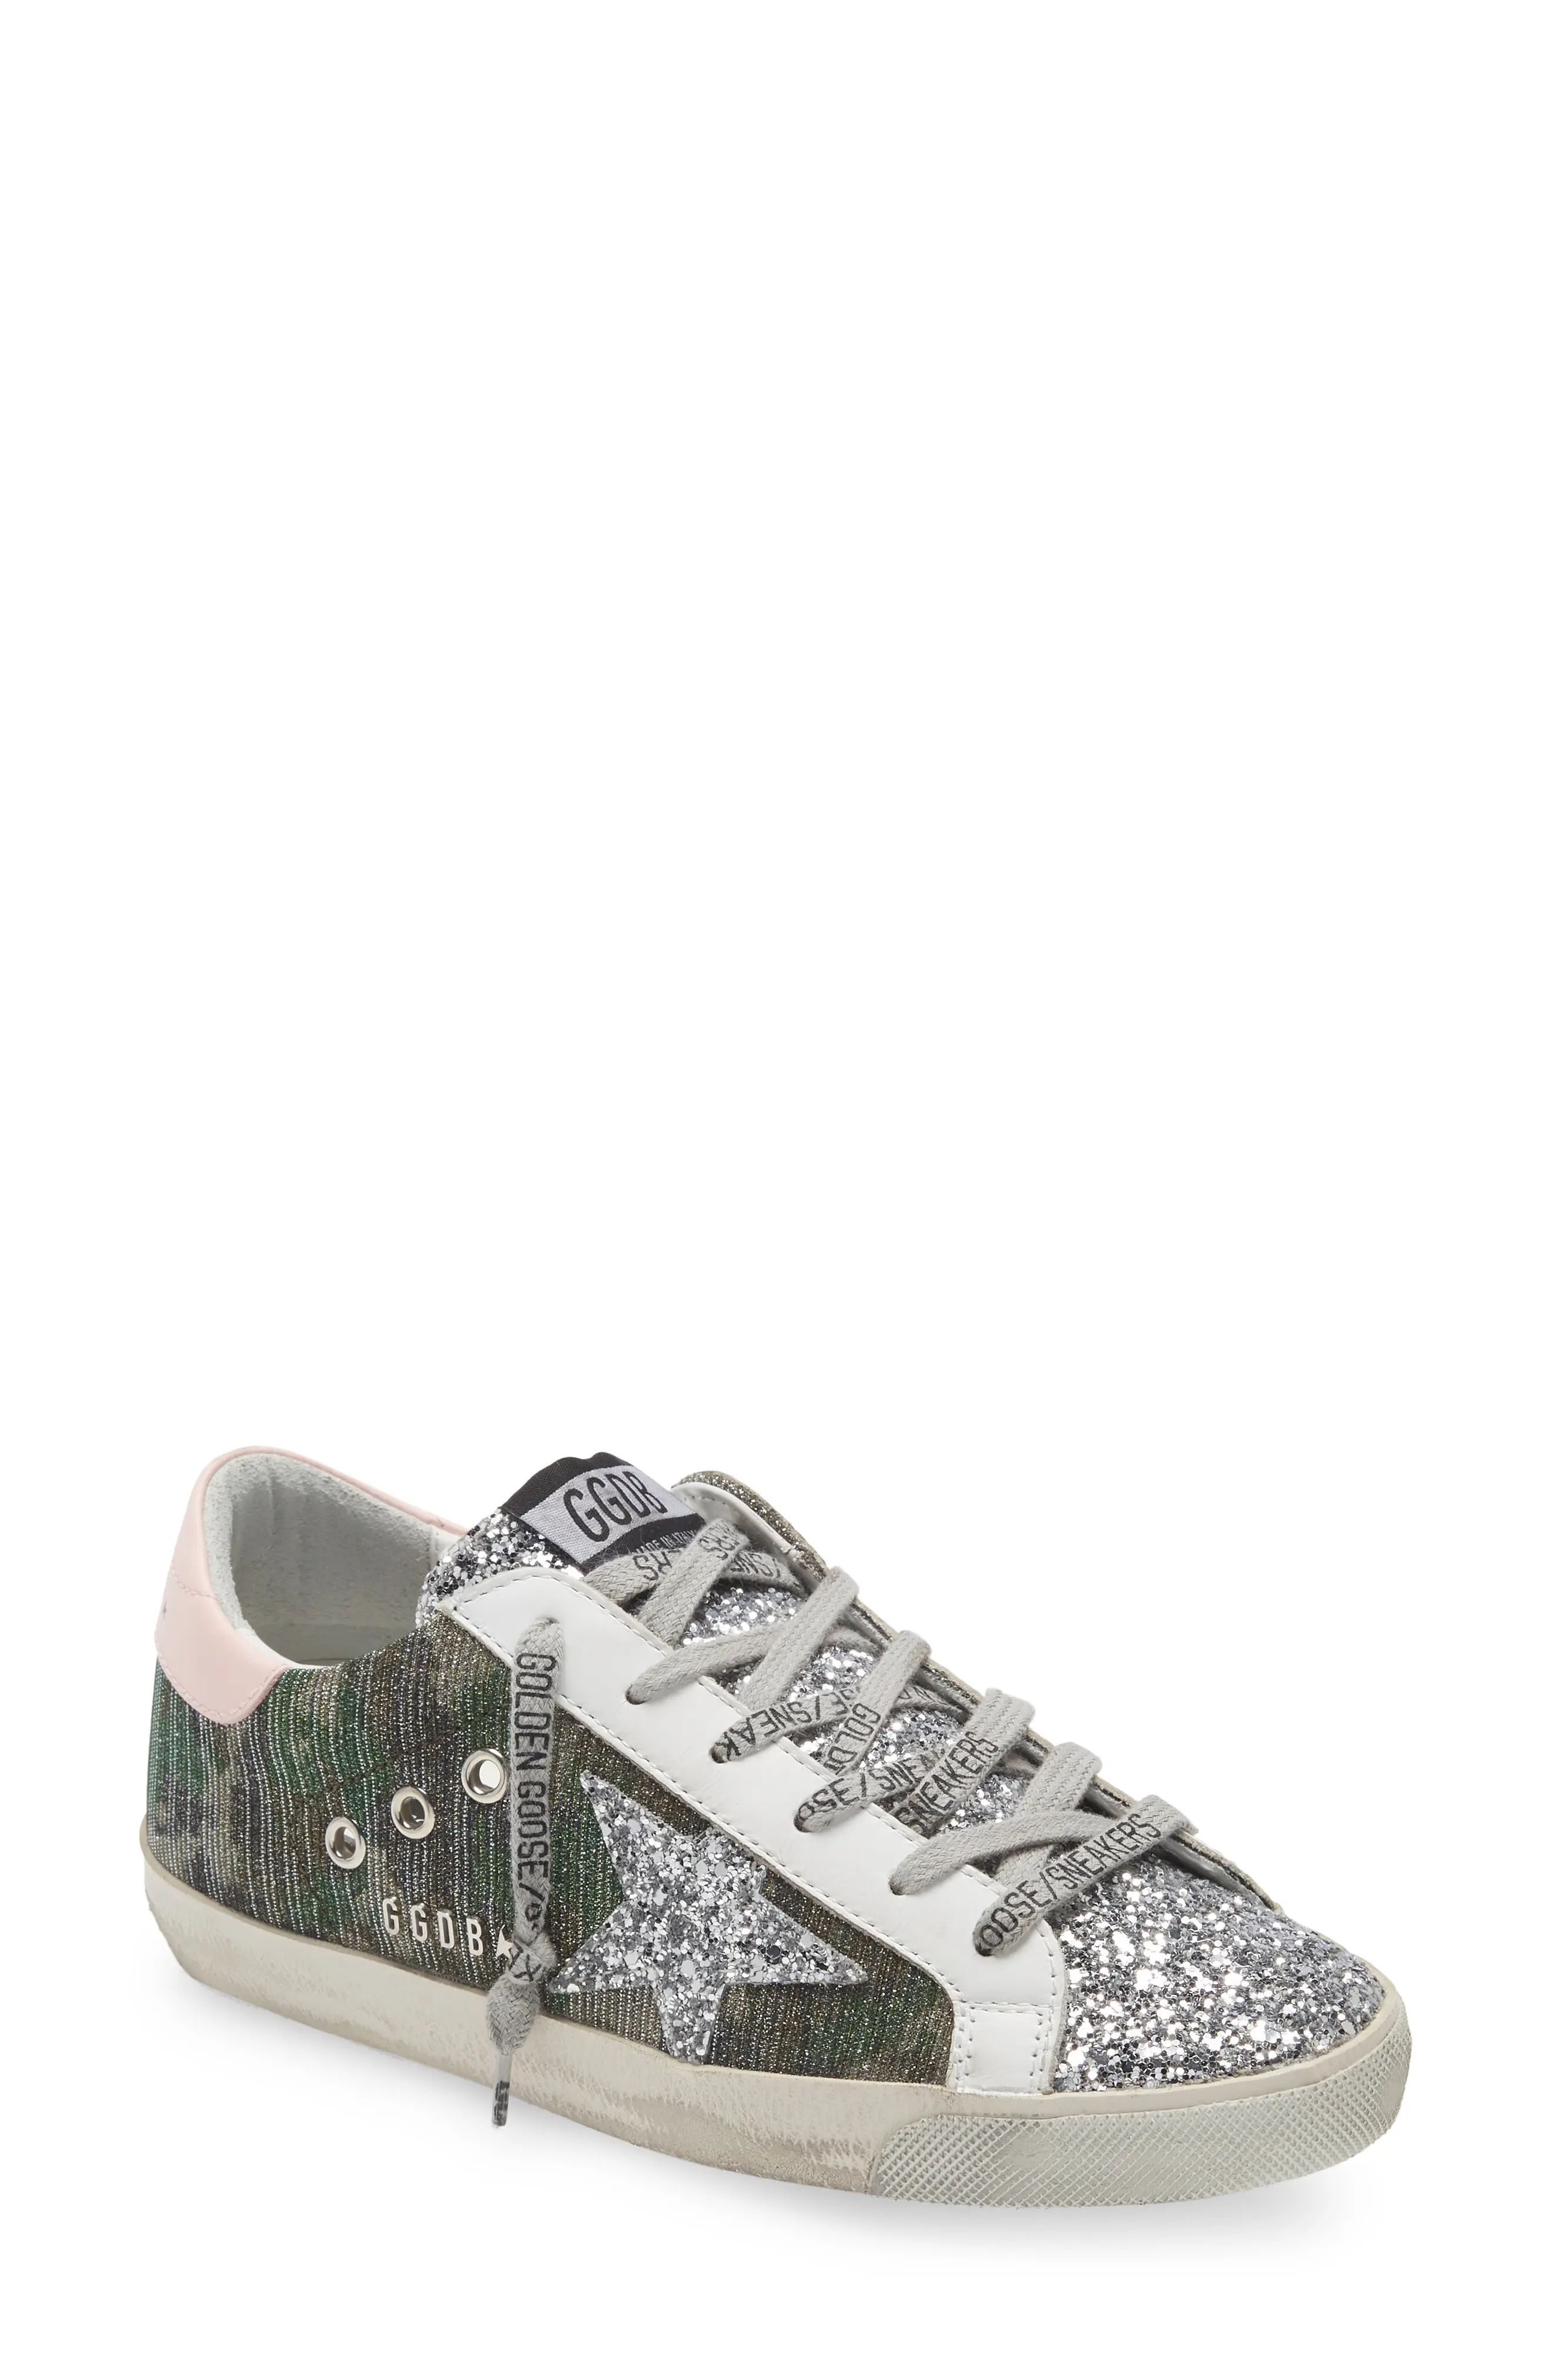 Golden Goose Super-Star Low Top Sneaker, Size 10Us in Green/Silver/Pink/White at Nordstrom | Nordstrom